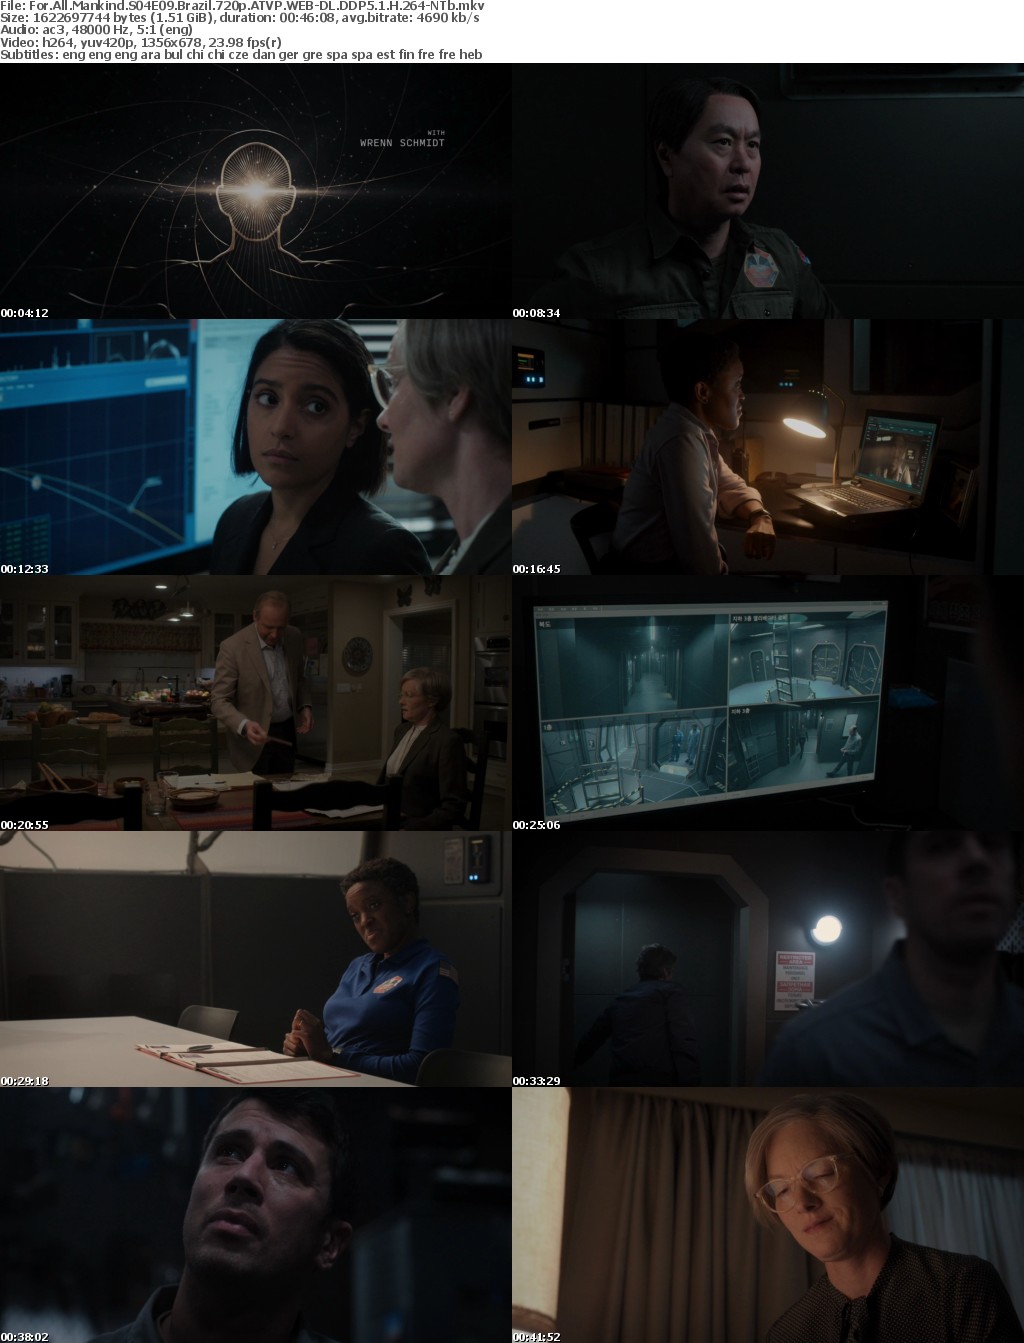 For All Mankind S04E09 Brazil 720p ATVP WEB-DL DDP5 1 H 264-NTb